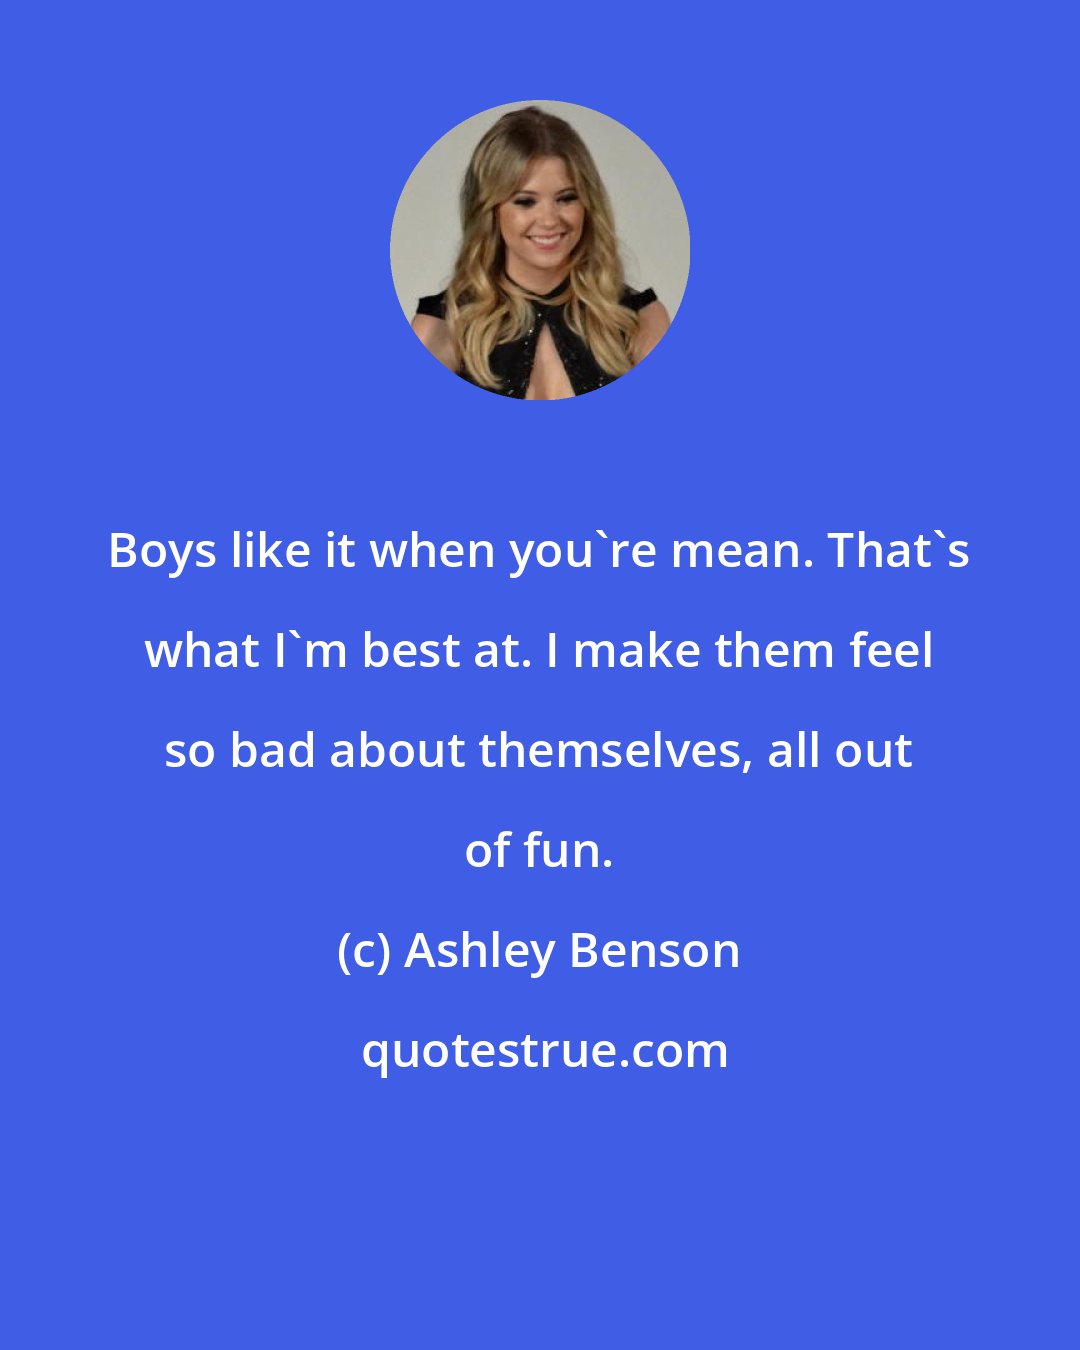 Ashley Benson: Boys like it when you're mean. That's what I'm best at. I make them feel so bad about themselves, all out of fun.